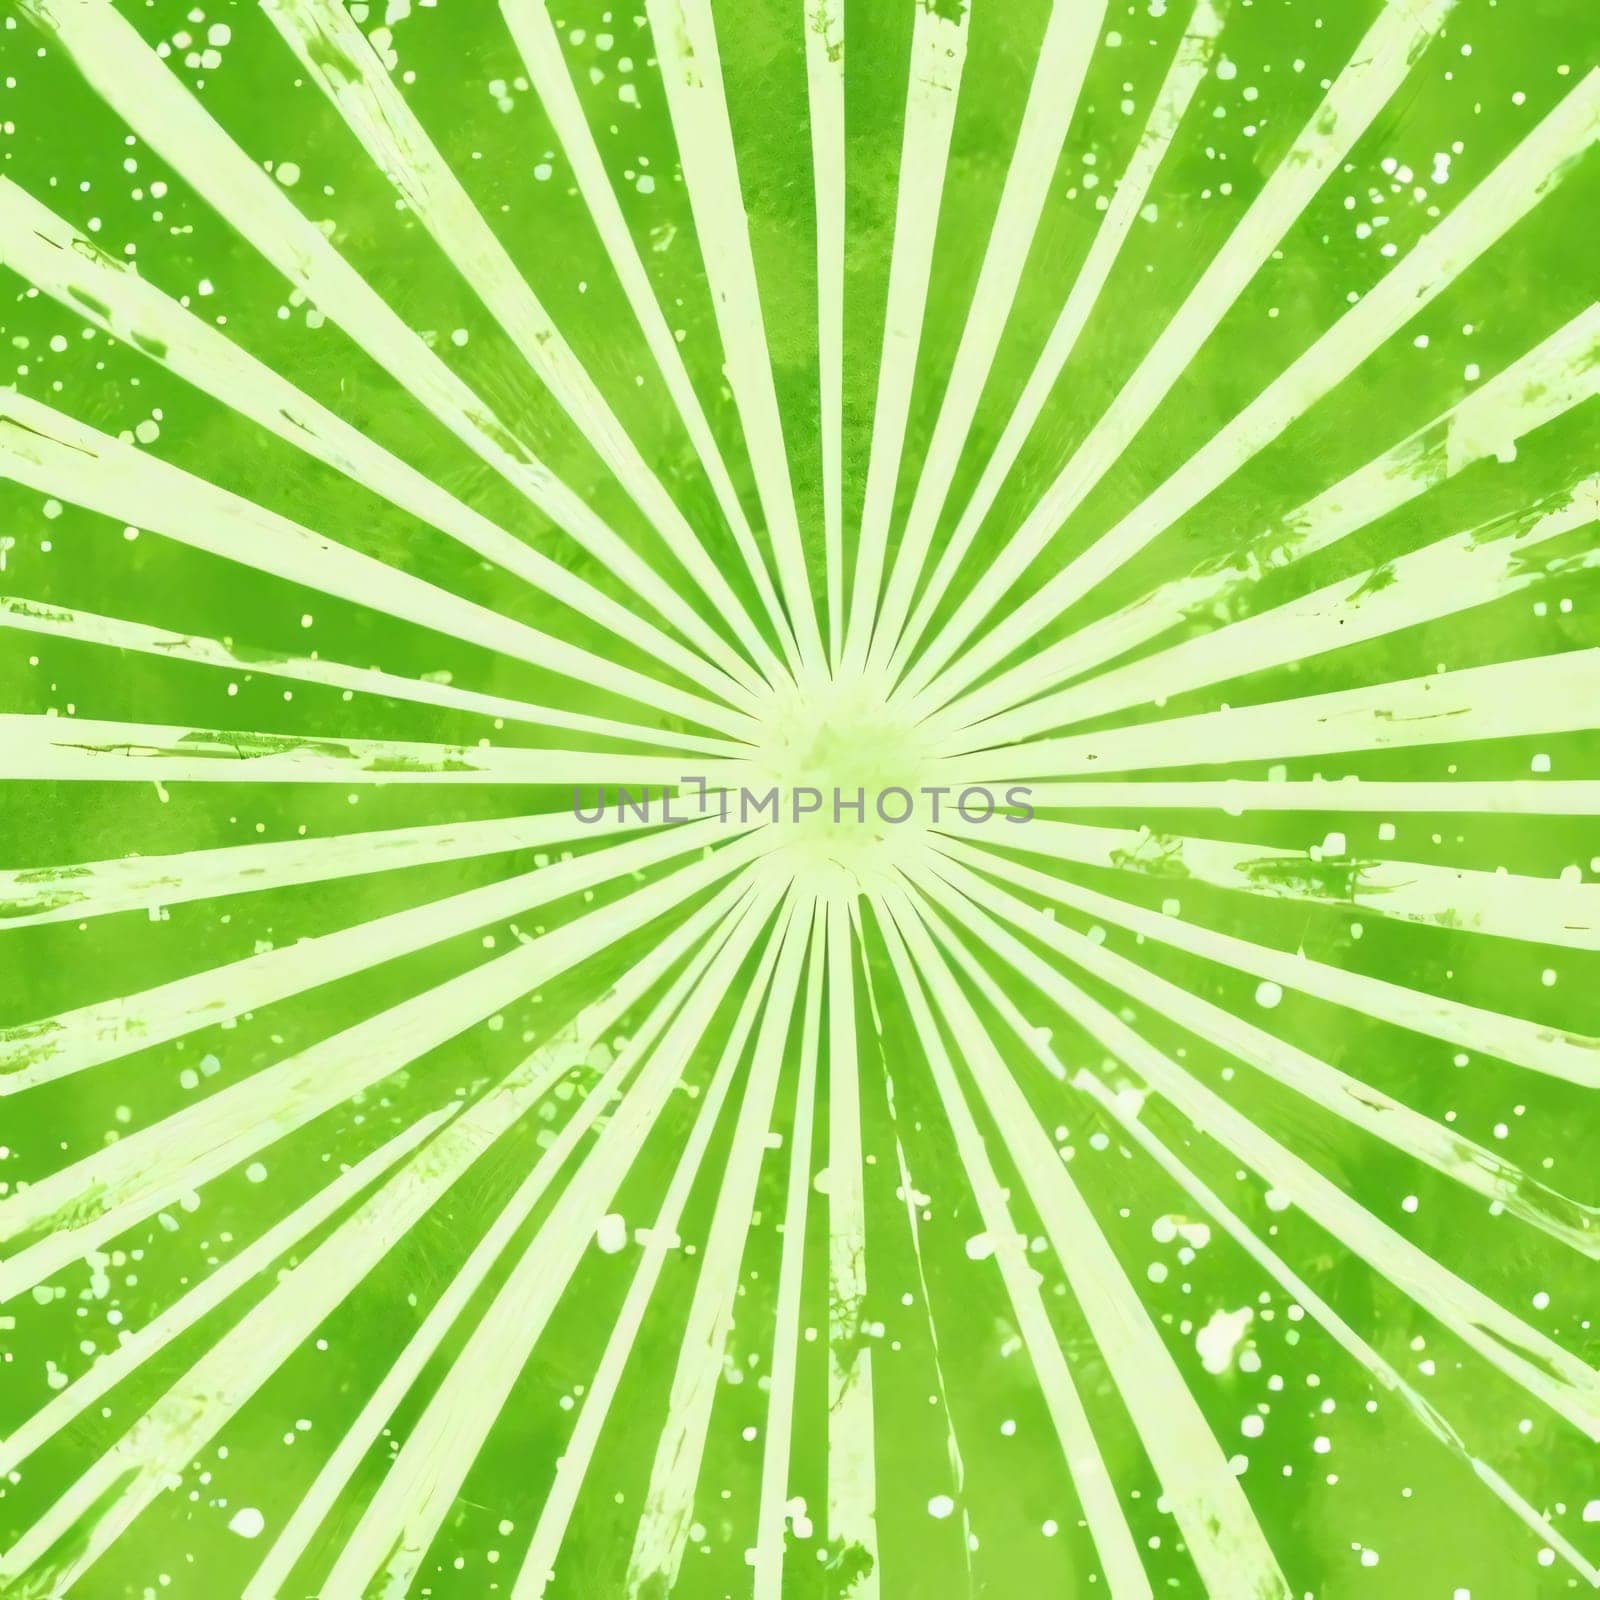 Abstract background design: Green grunge background with sun rays. EPS10 vector file included